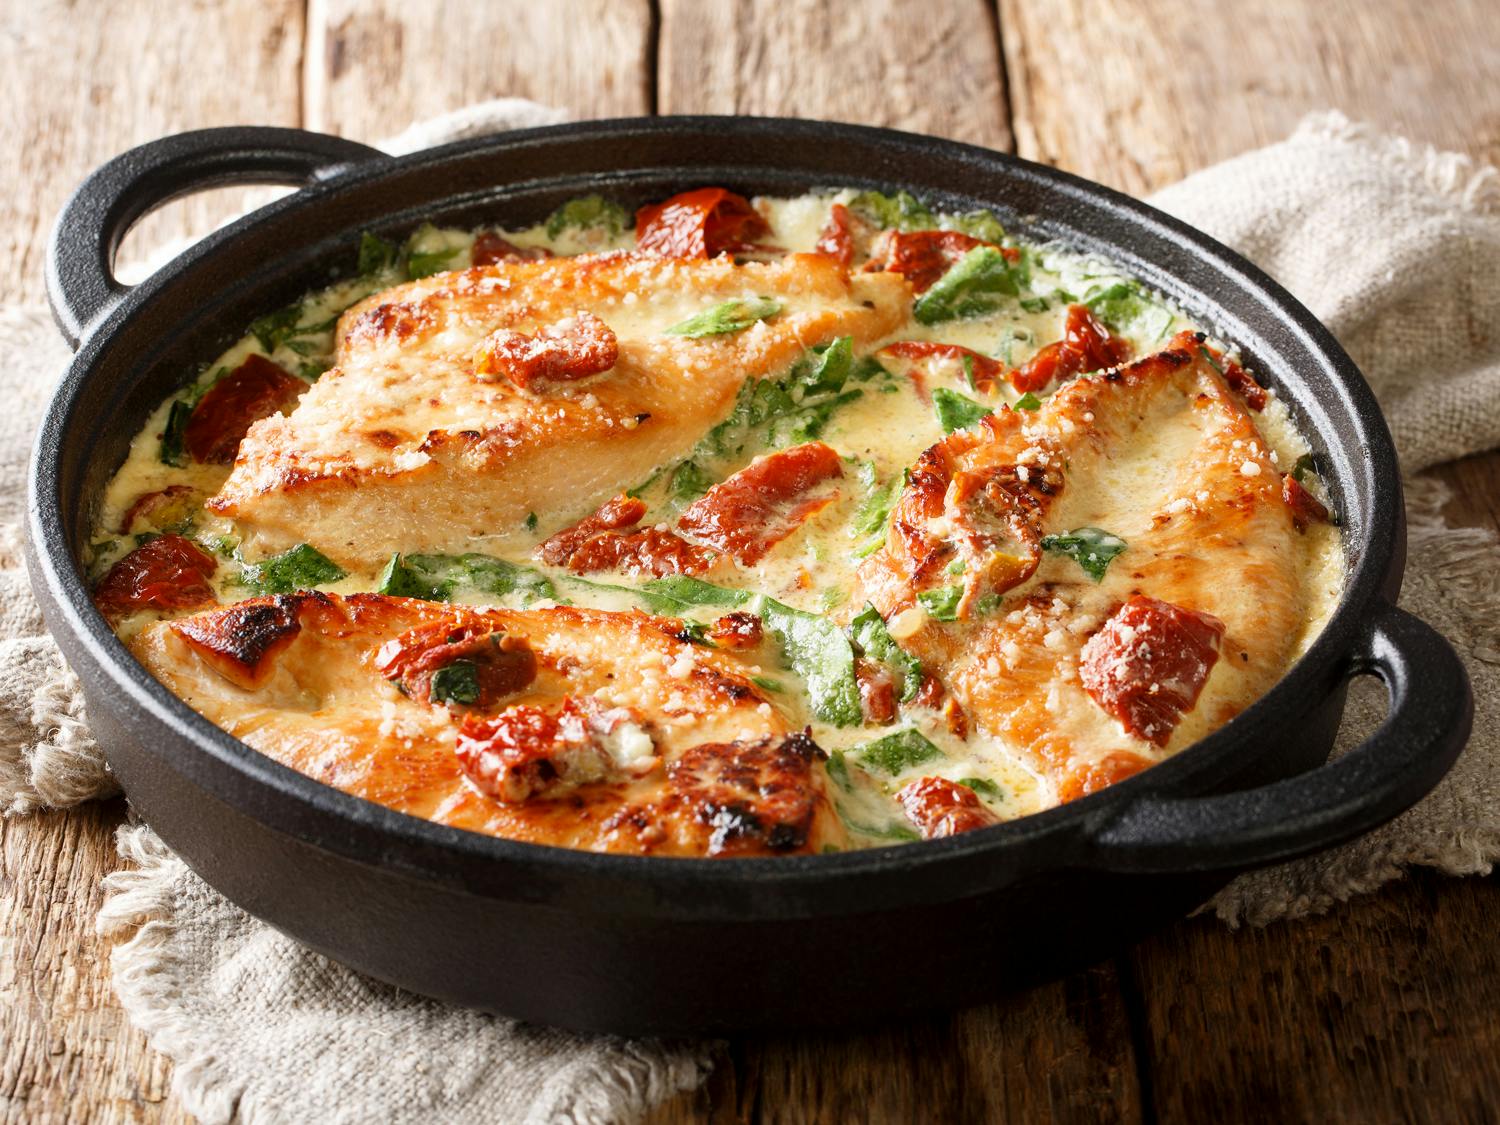 Creamy Tuscan Chicken with Sun-Dried Tomatoes and Spinach recipe